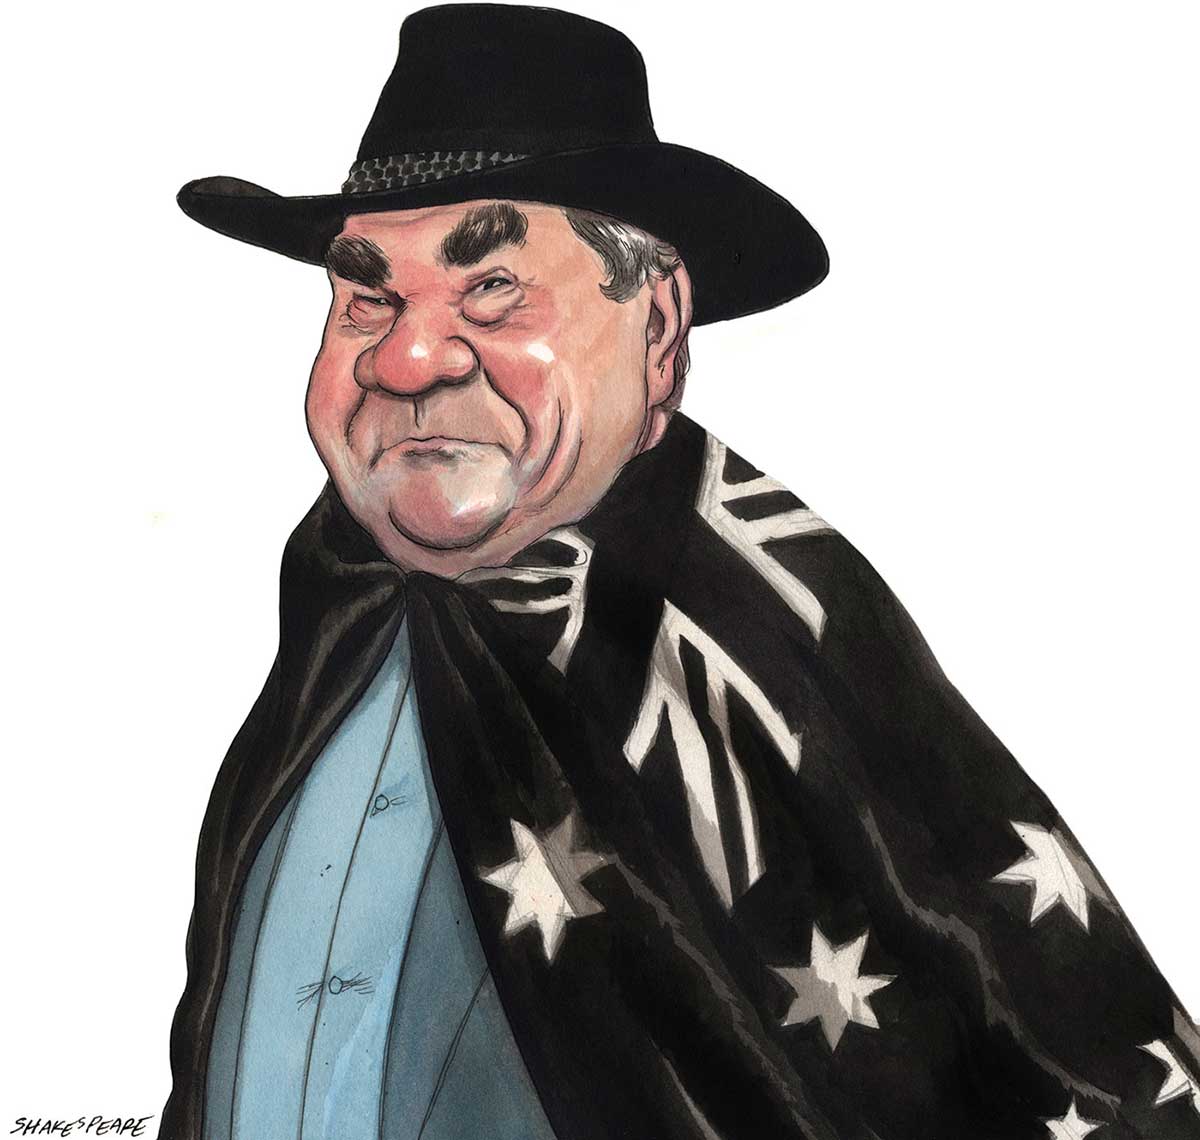 A colour cartoon depicting Mick Dodson wearing an Australian flag as a cape. He faces to the left of the image and wears a black hat. His face is turned toward the viewer. His expression is one of tenacity, determination and good humour. He wears a grey jacket and blue shirt under the flag cape. He has large bushy eyebrows and his face is heavy-set and fleshy. - click to view larger image